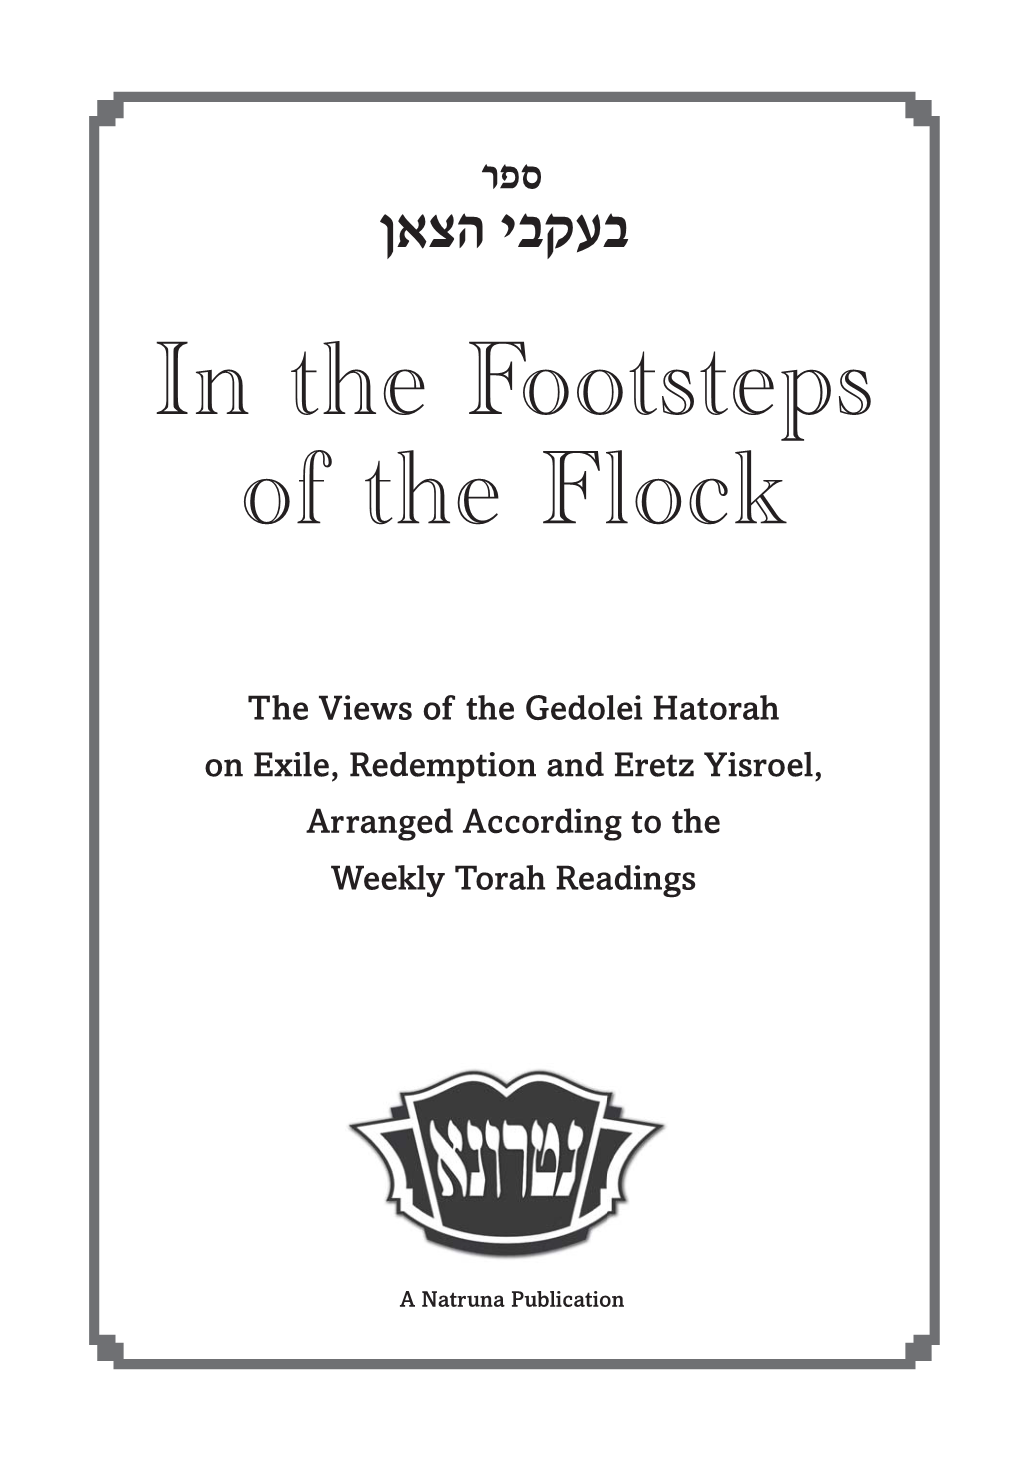 In the Footsteps of the Flock by Yirmiyahu Cohen